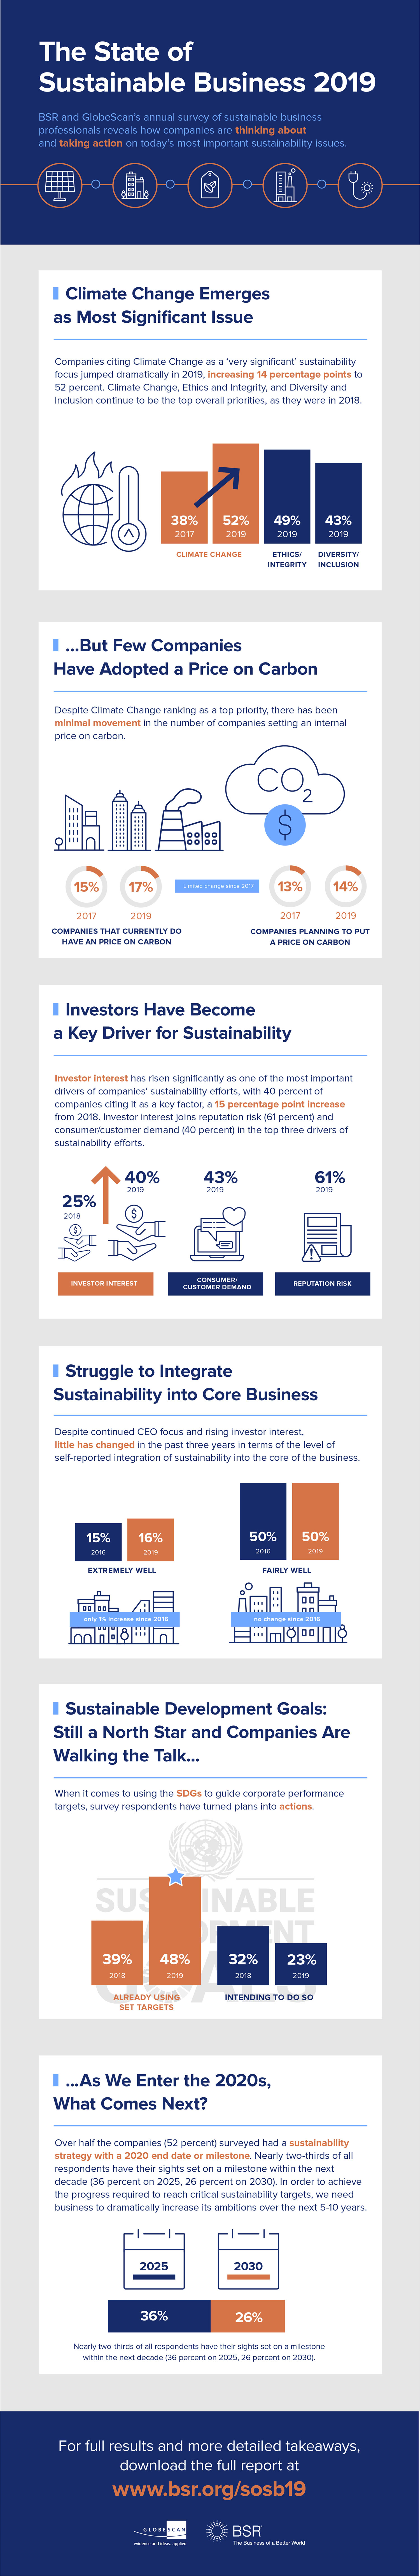 The State of Sustainable Business, infographic